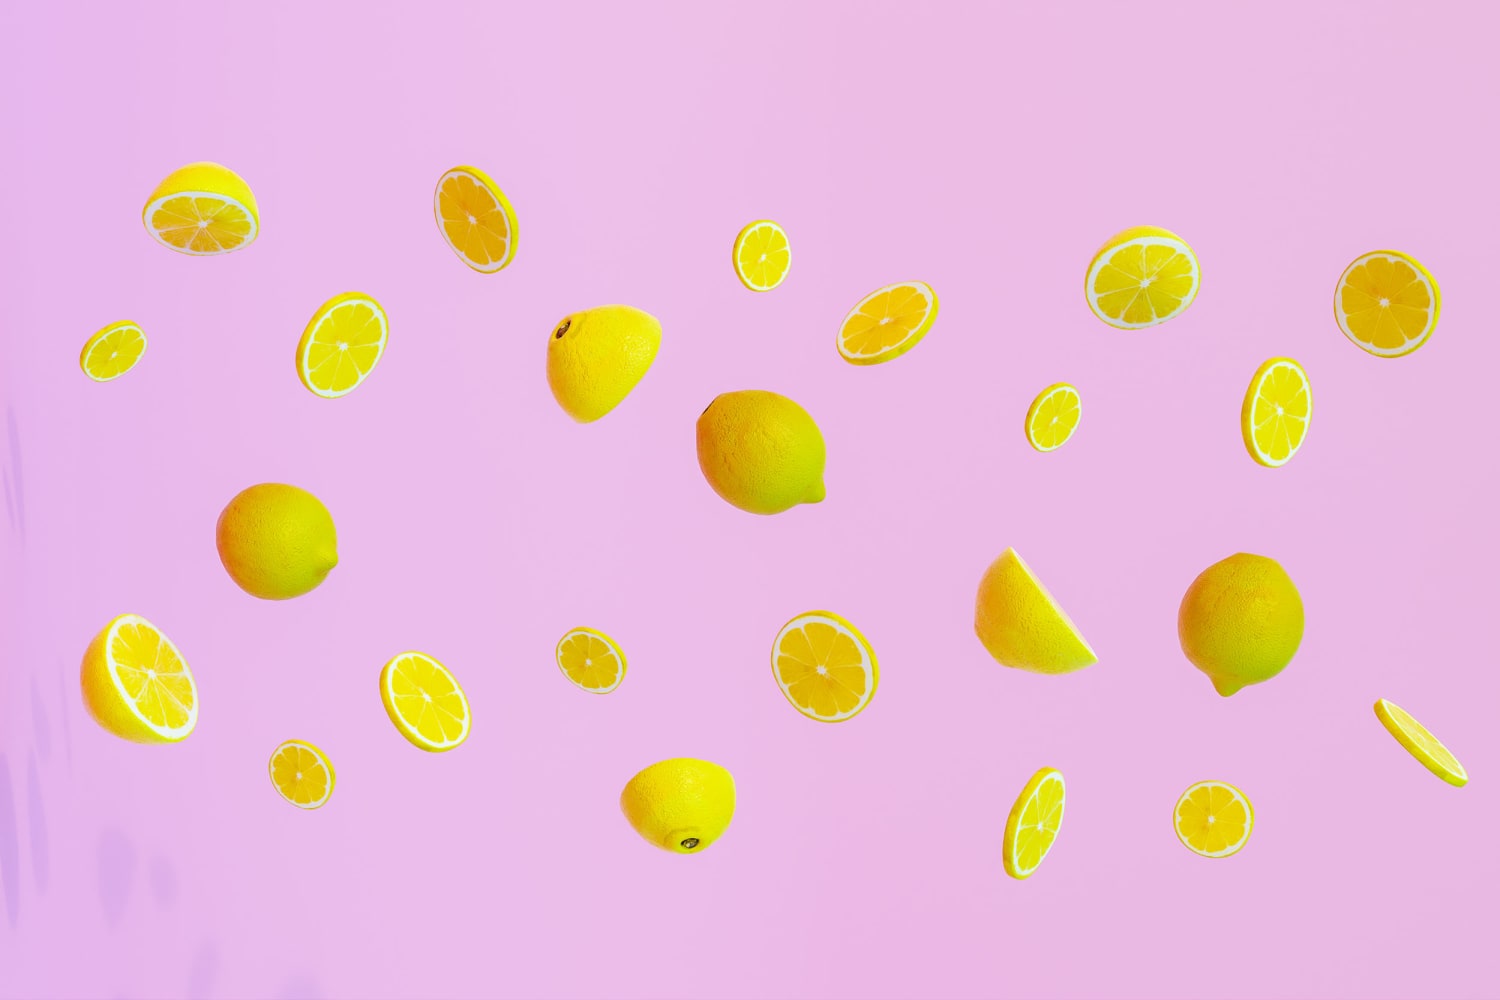 If you do this with lemons, you're throwing away powerful antioxidants